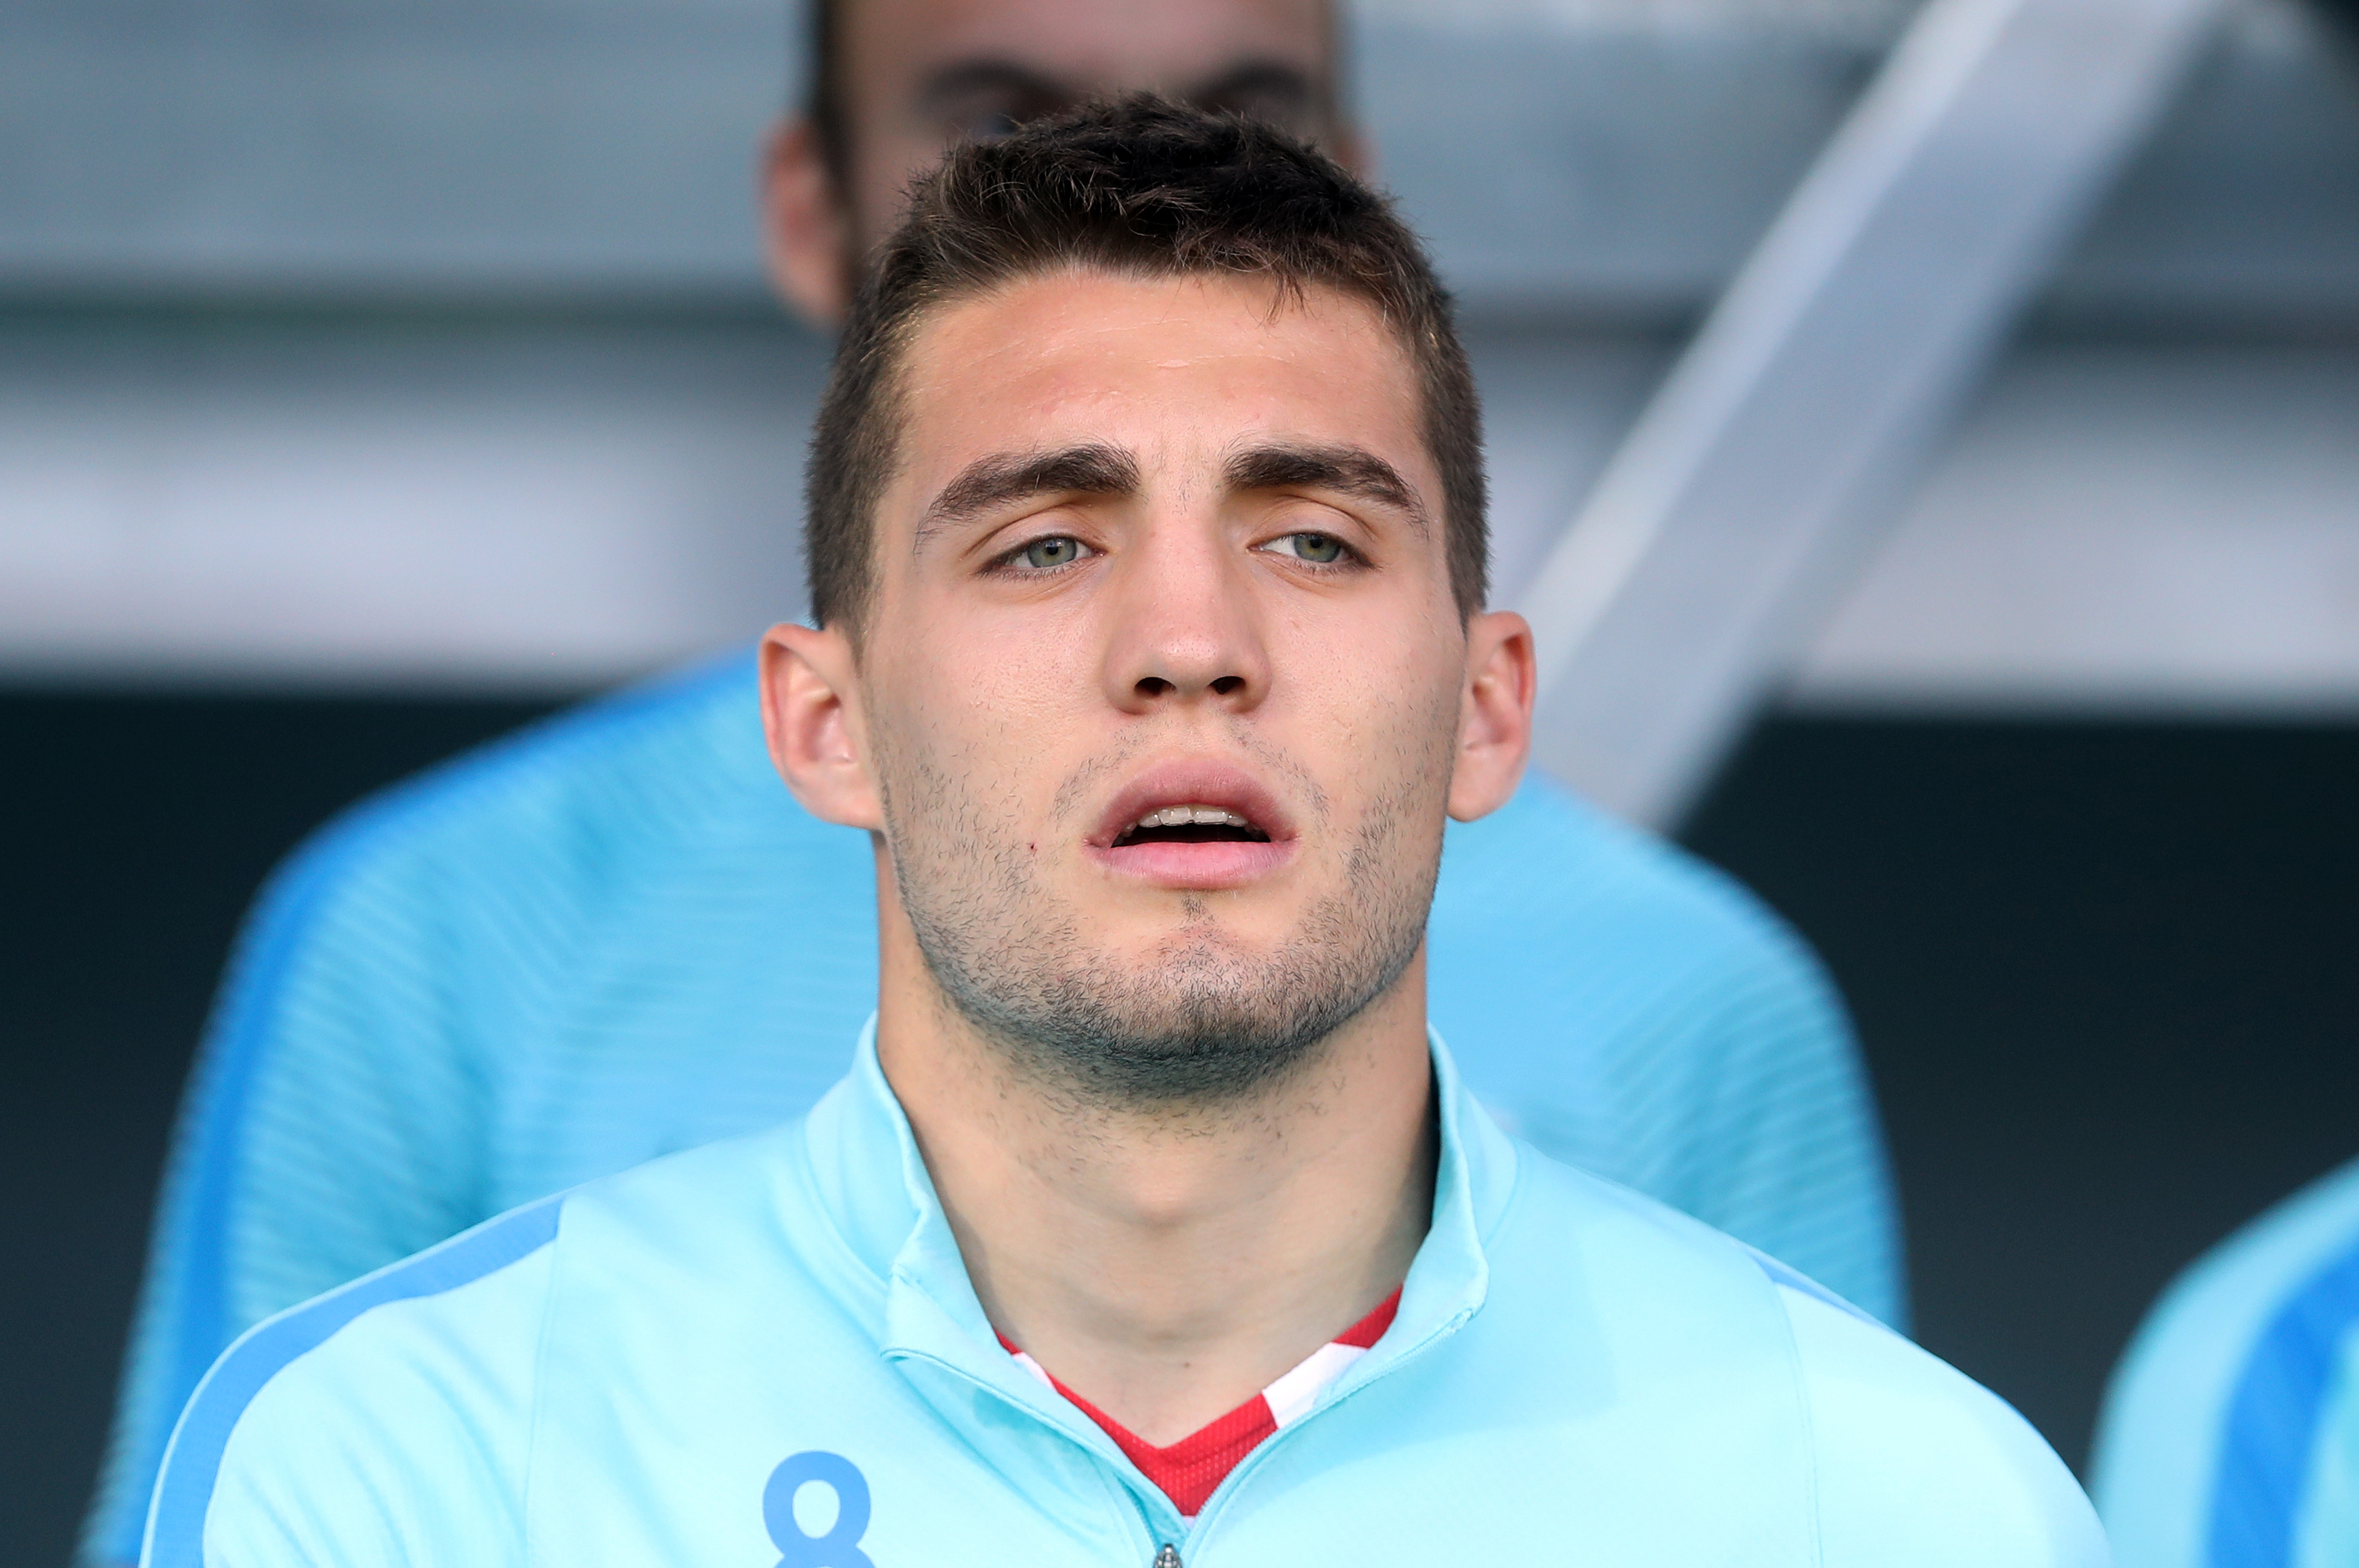 Croatia's midfielder Mateo Kovacic is pictured before the friendly football match between Croatia and San Marino in Rijeka, Croatia, on June 4, 2016. / AFP / STR        (Photo credit should read STR/AFP/Getty Images)